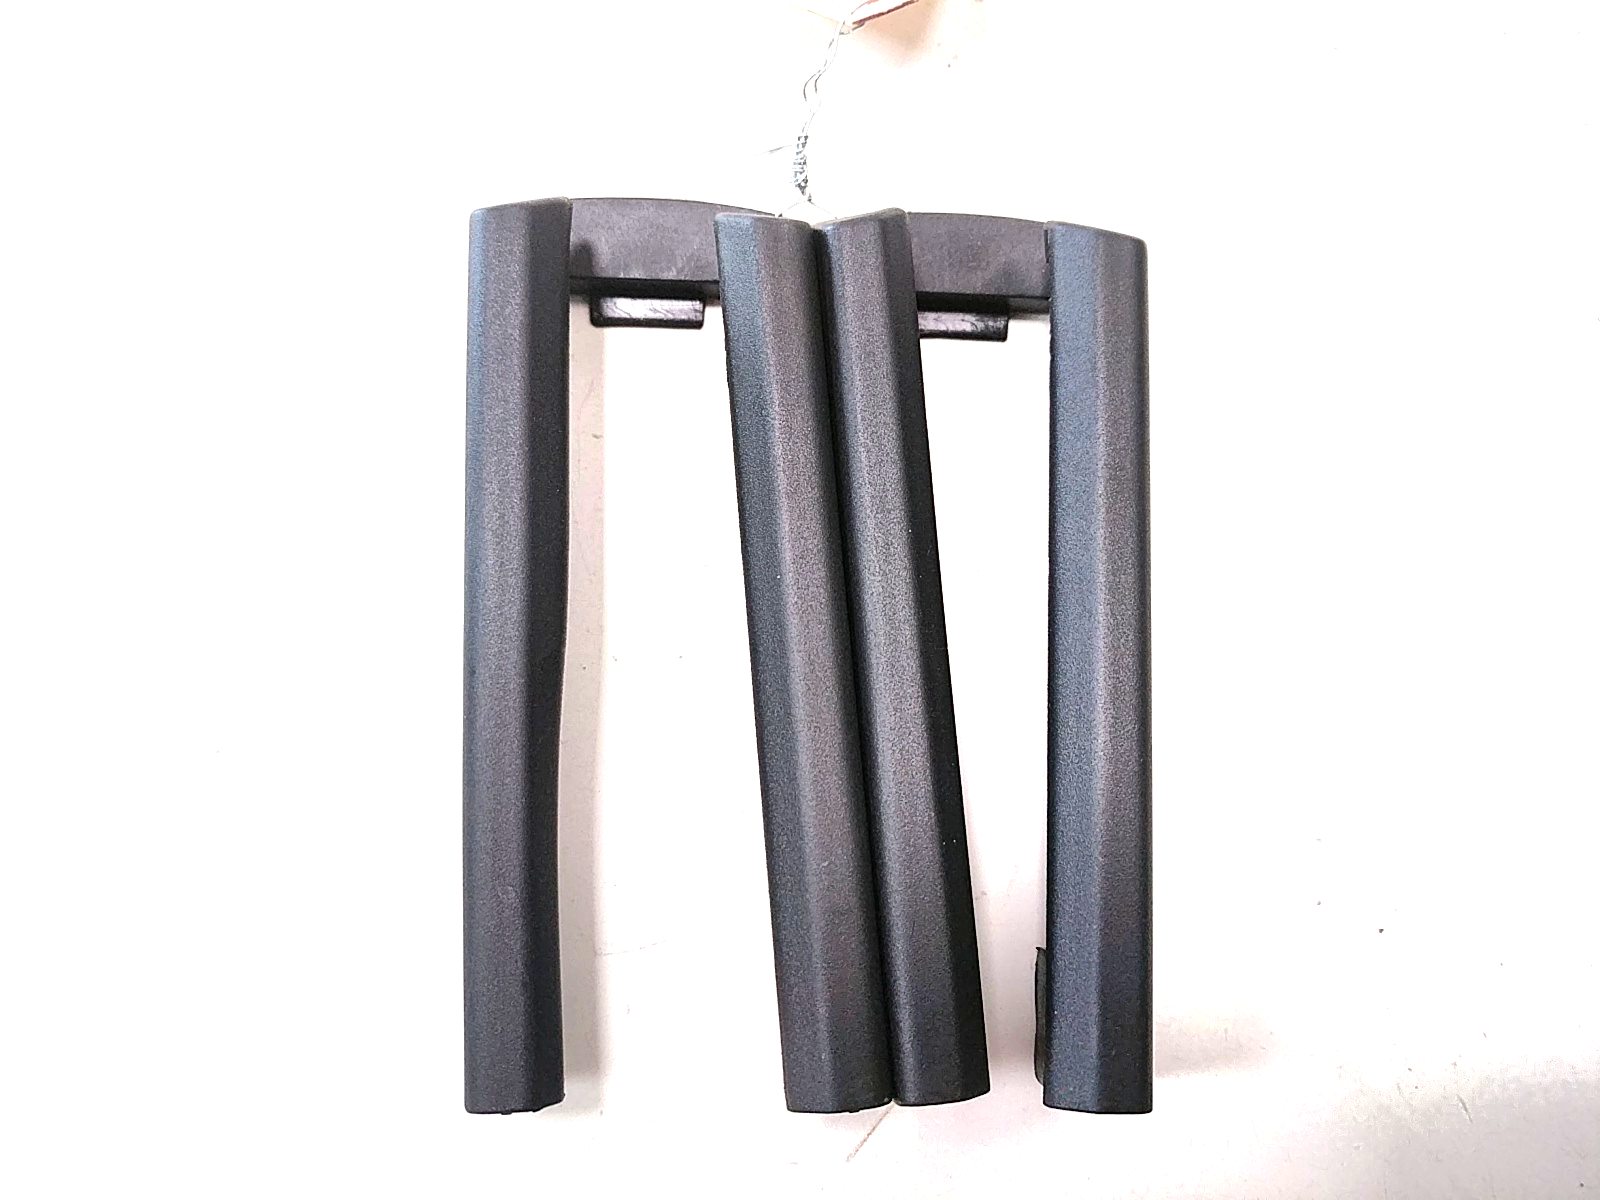 2018 Tesla Model 3 Front Right Seat Track Cover Trim Set Pair